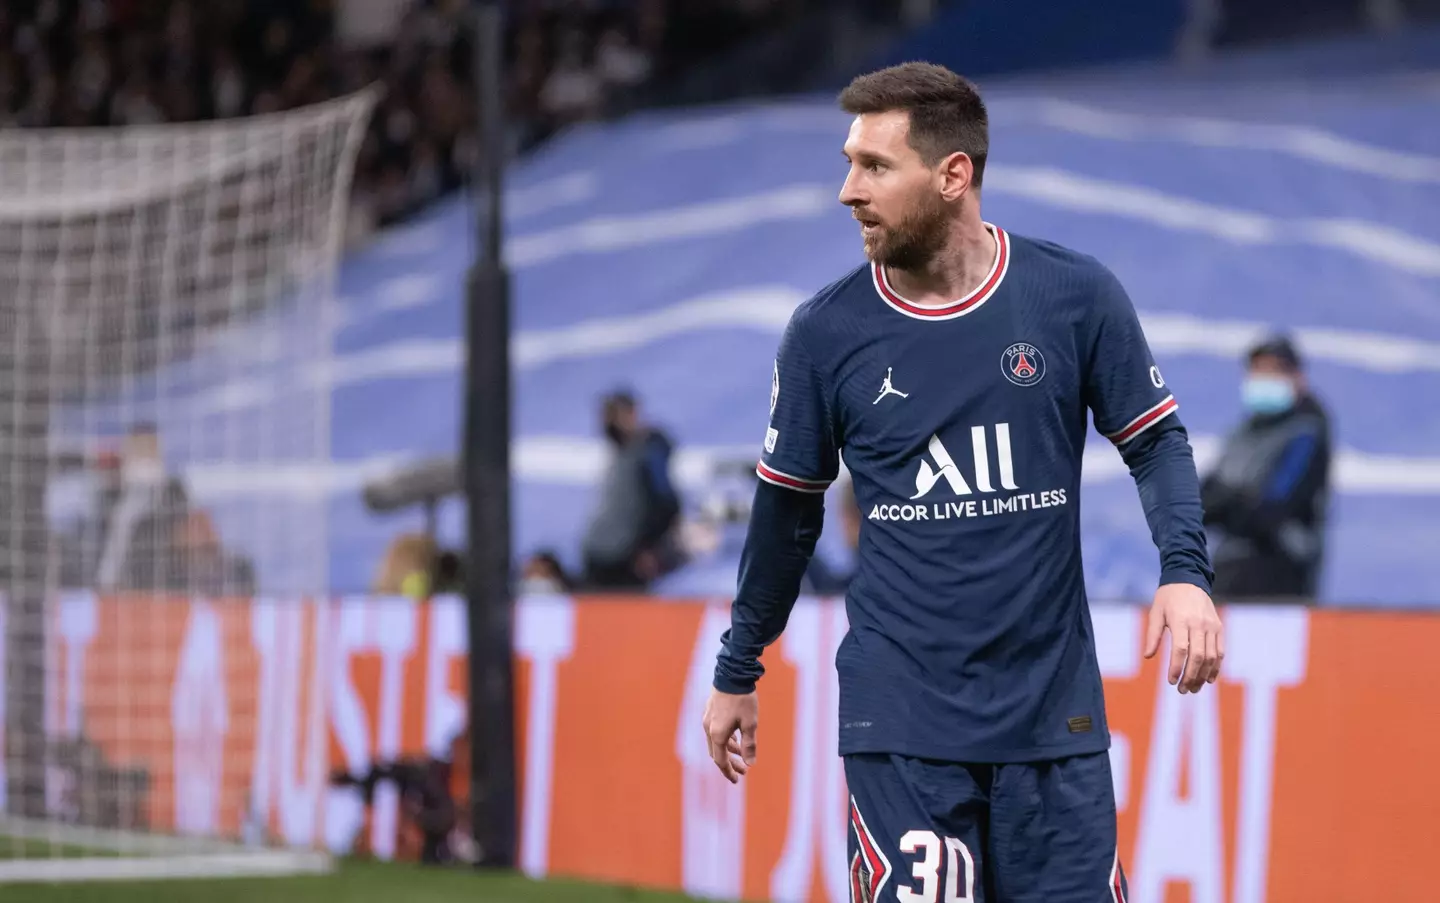 Messi was booed by PSG's supporters after their defeat to Real Madrid (Image: PA)